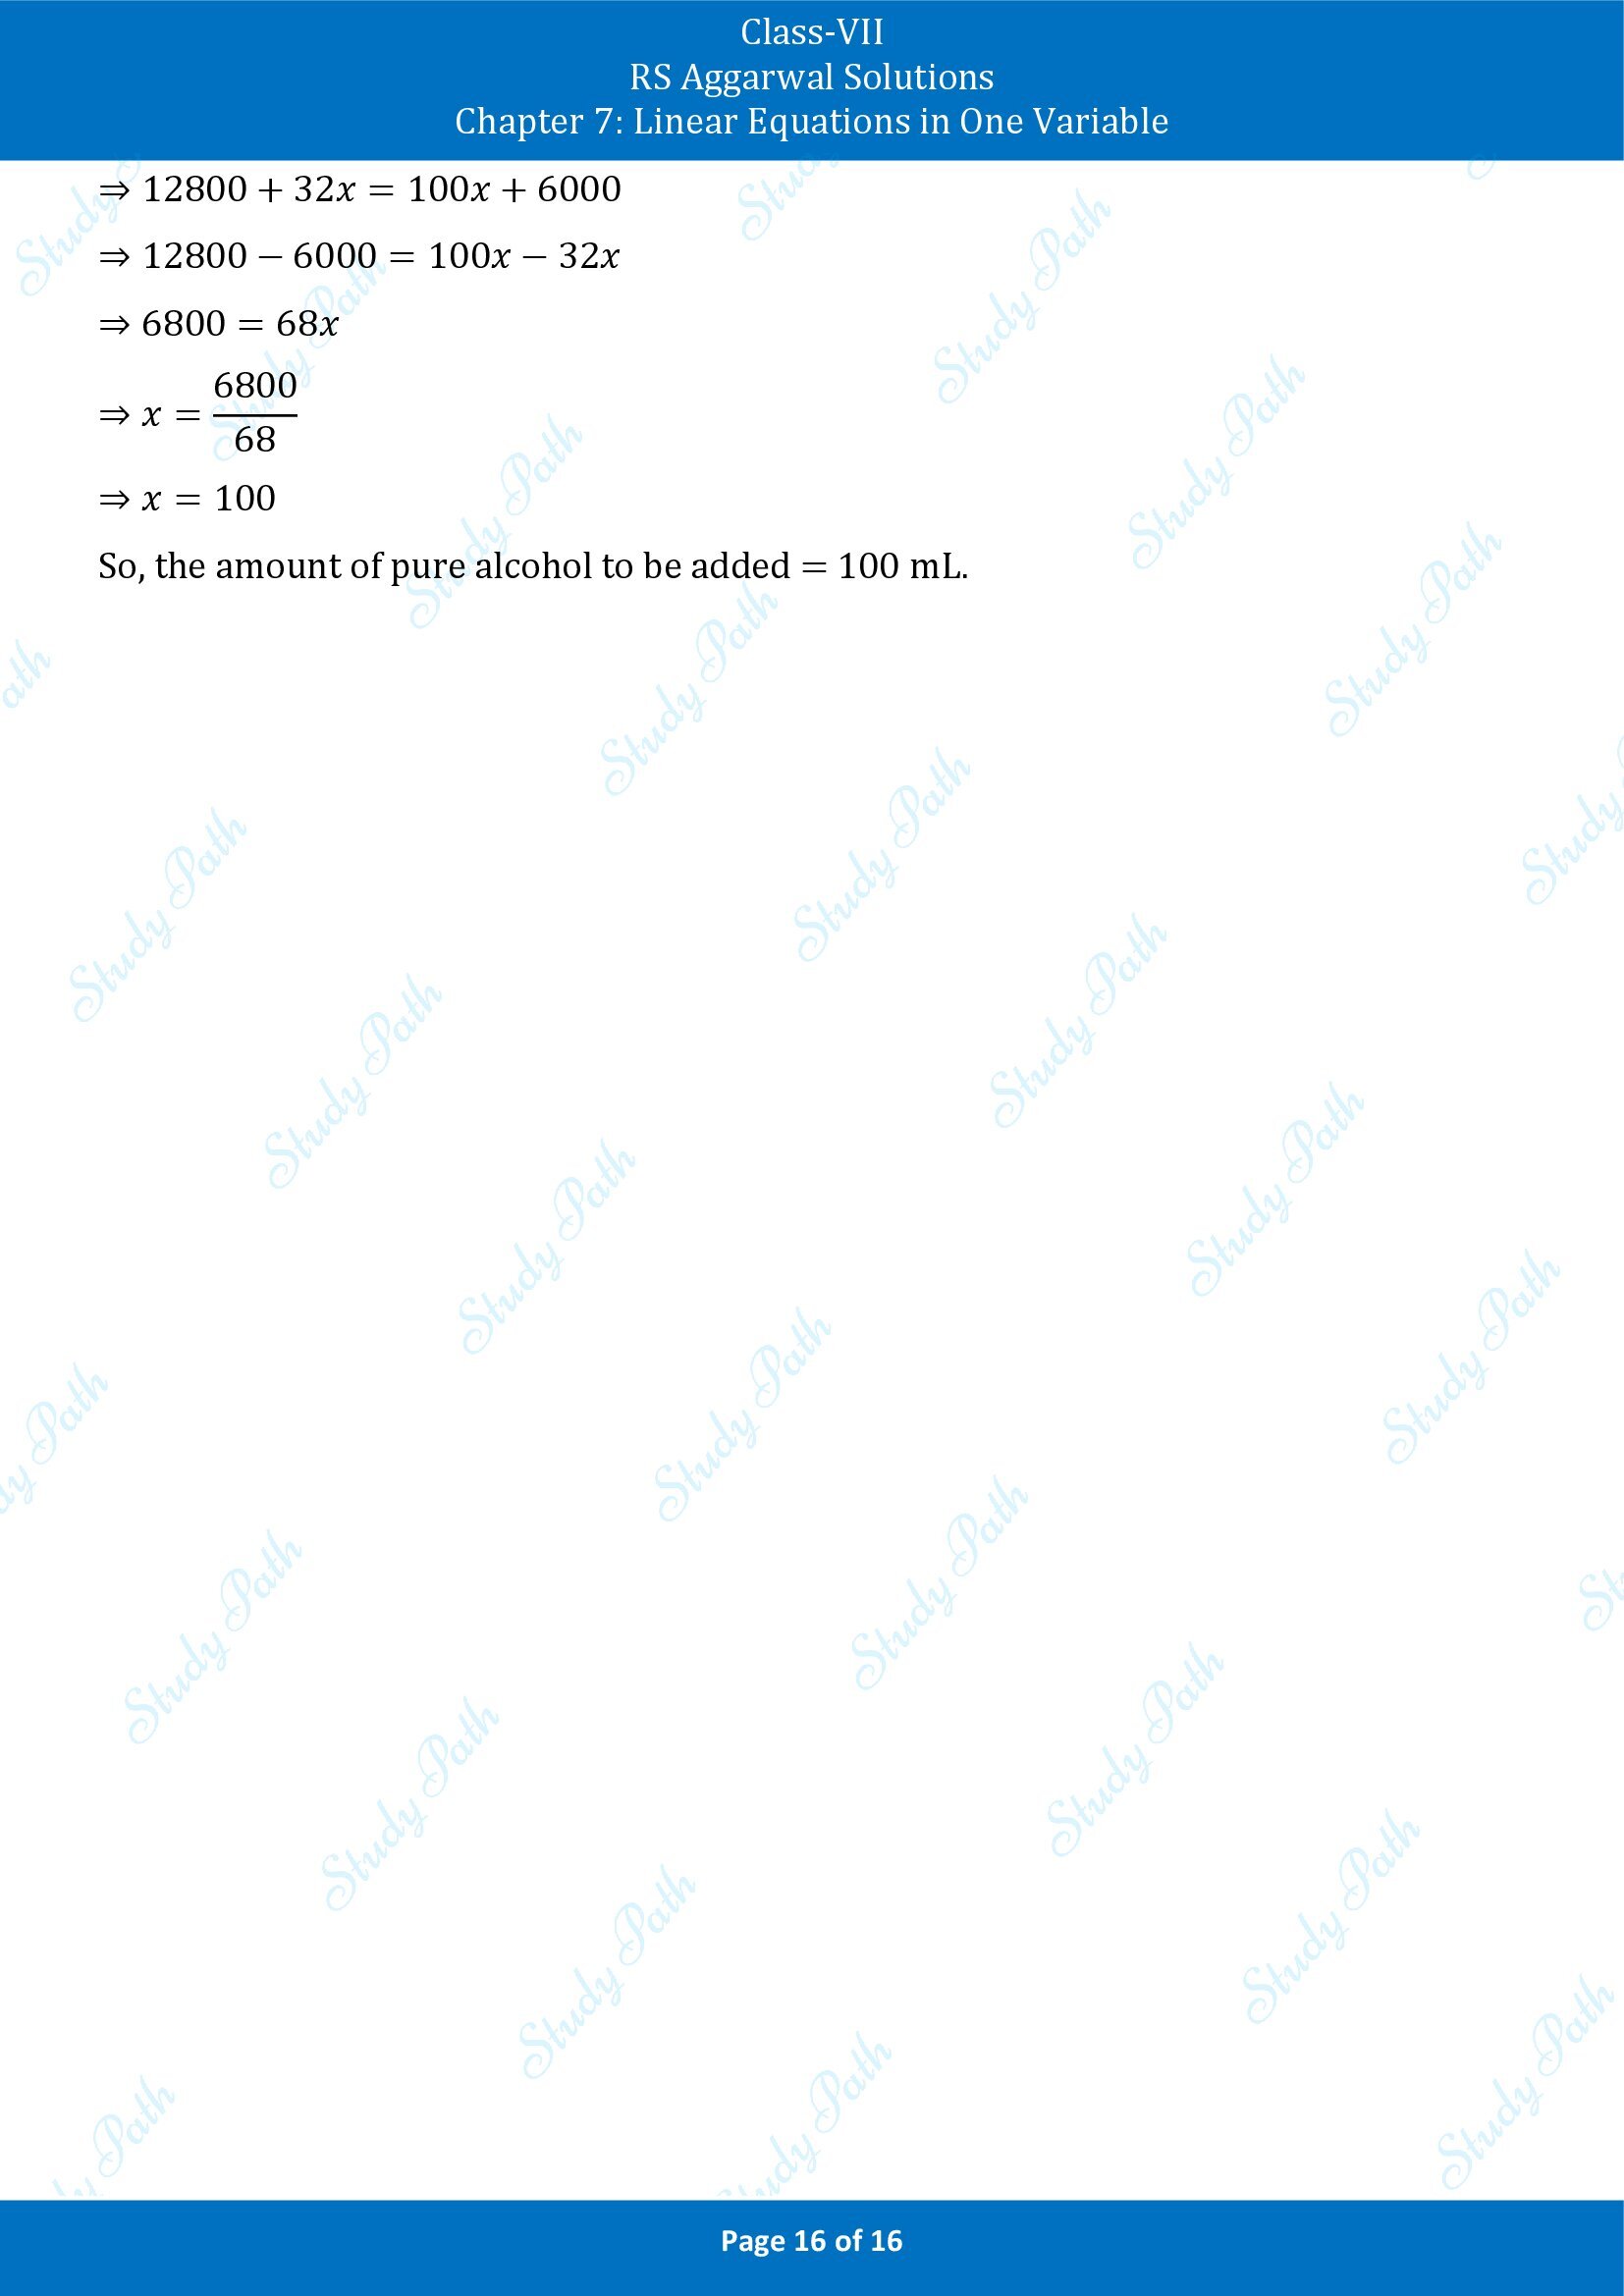 RS Aggarwal Solutions Class 7 Chapter 7 Linear Equations in One Variable Exercise 7B 00016